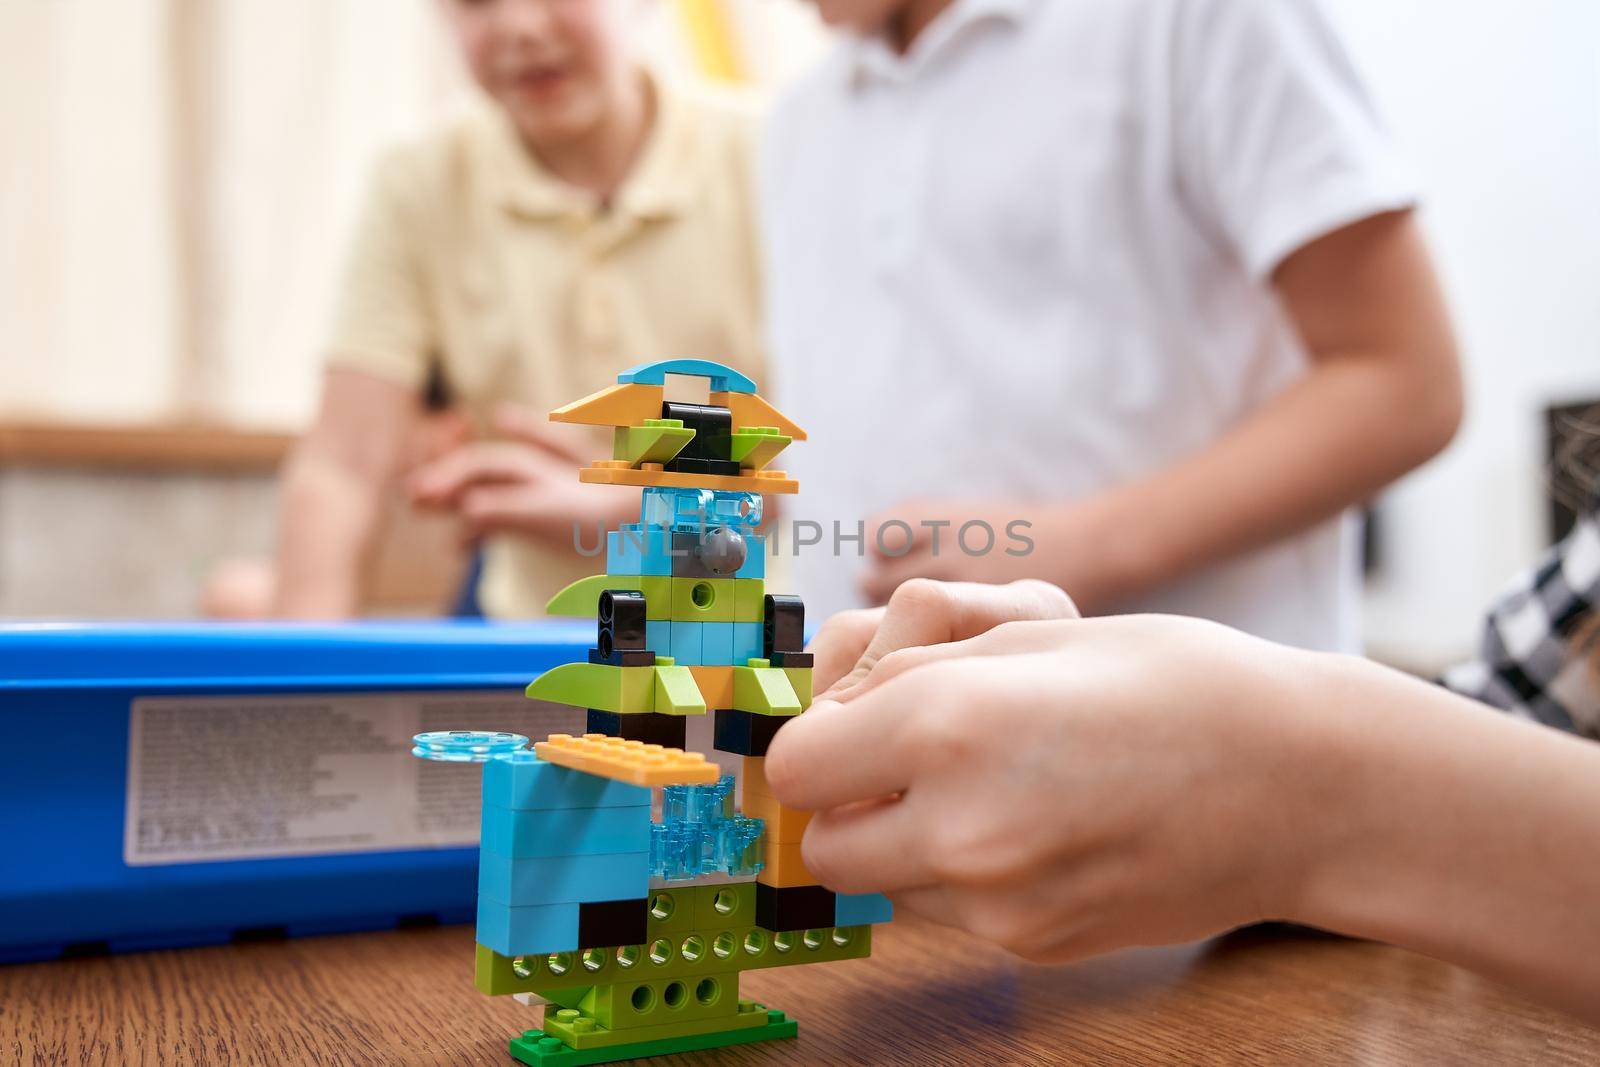 Selective focus of hands using building kit for kids, creating toys. Crop of incognito caucasian child working on project, taking colorful parts. Concept of science engineering.